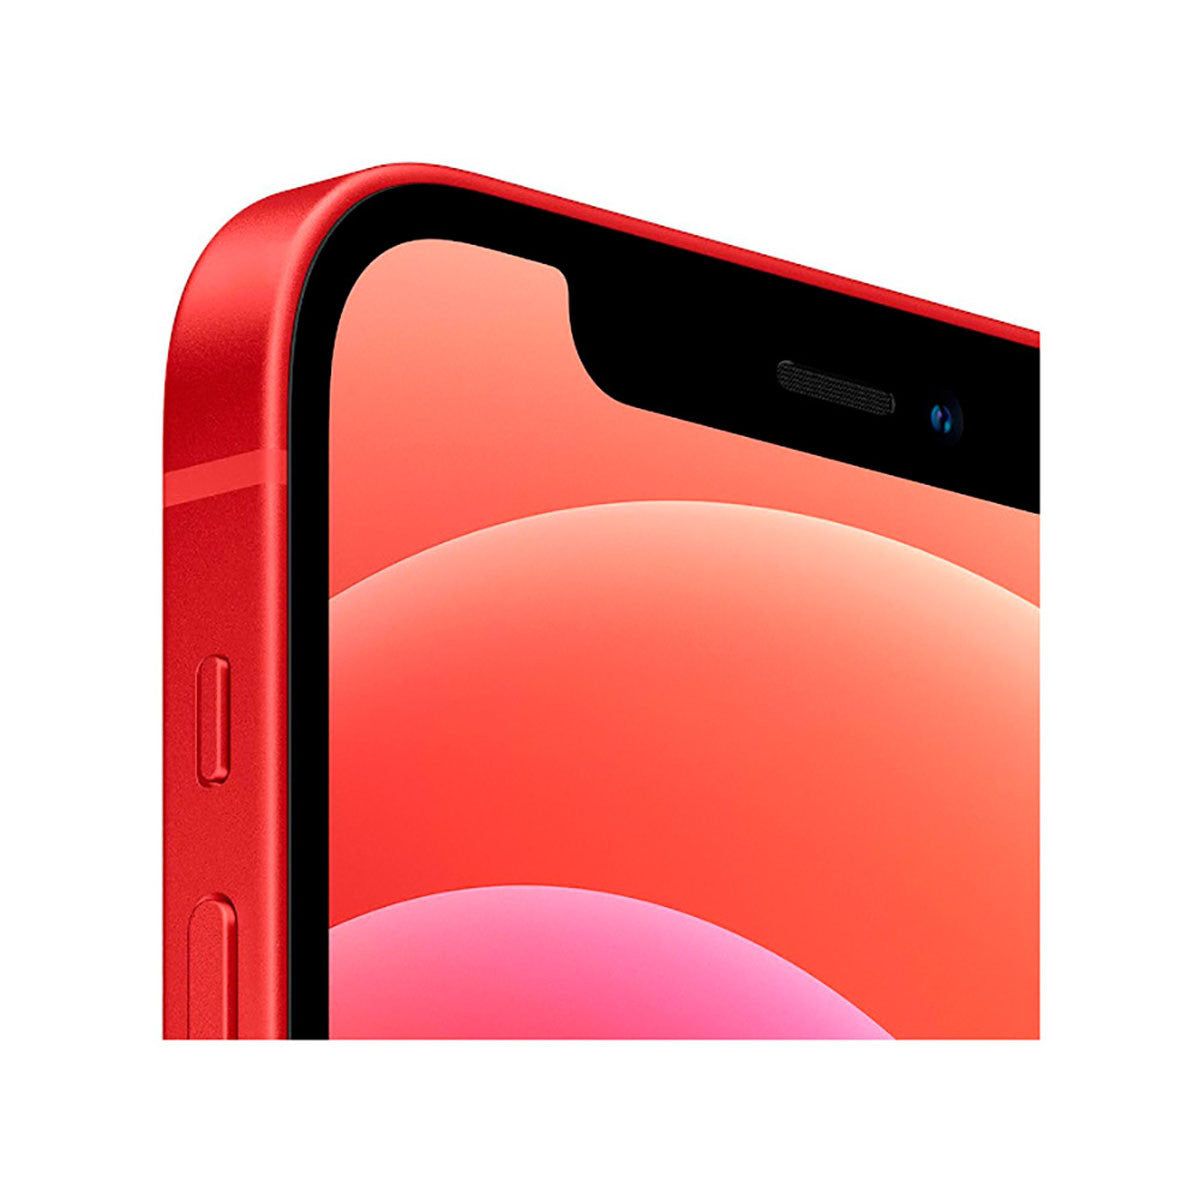 Apple iPhone 12 64GB Rojo (PRODUCT RED) Smartphone | Apple